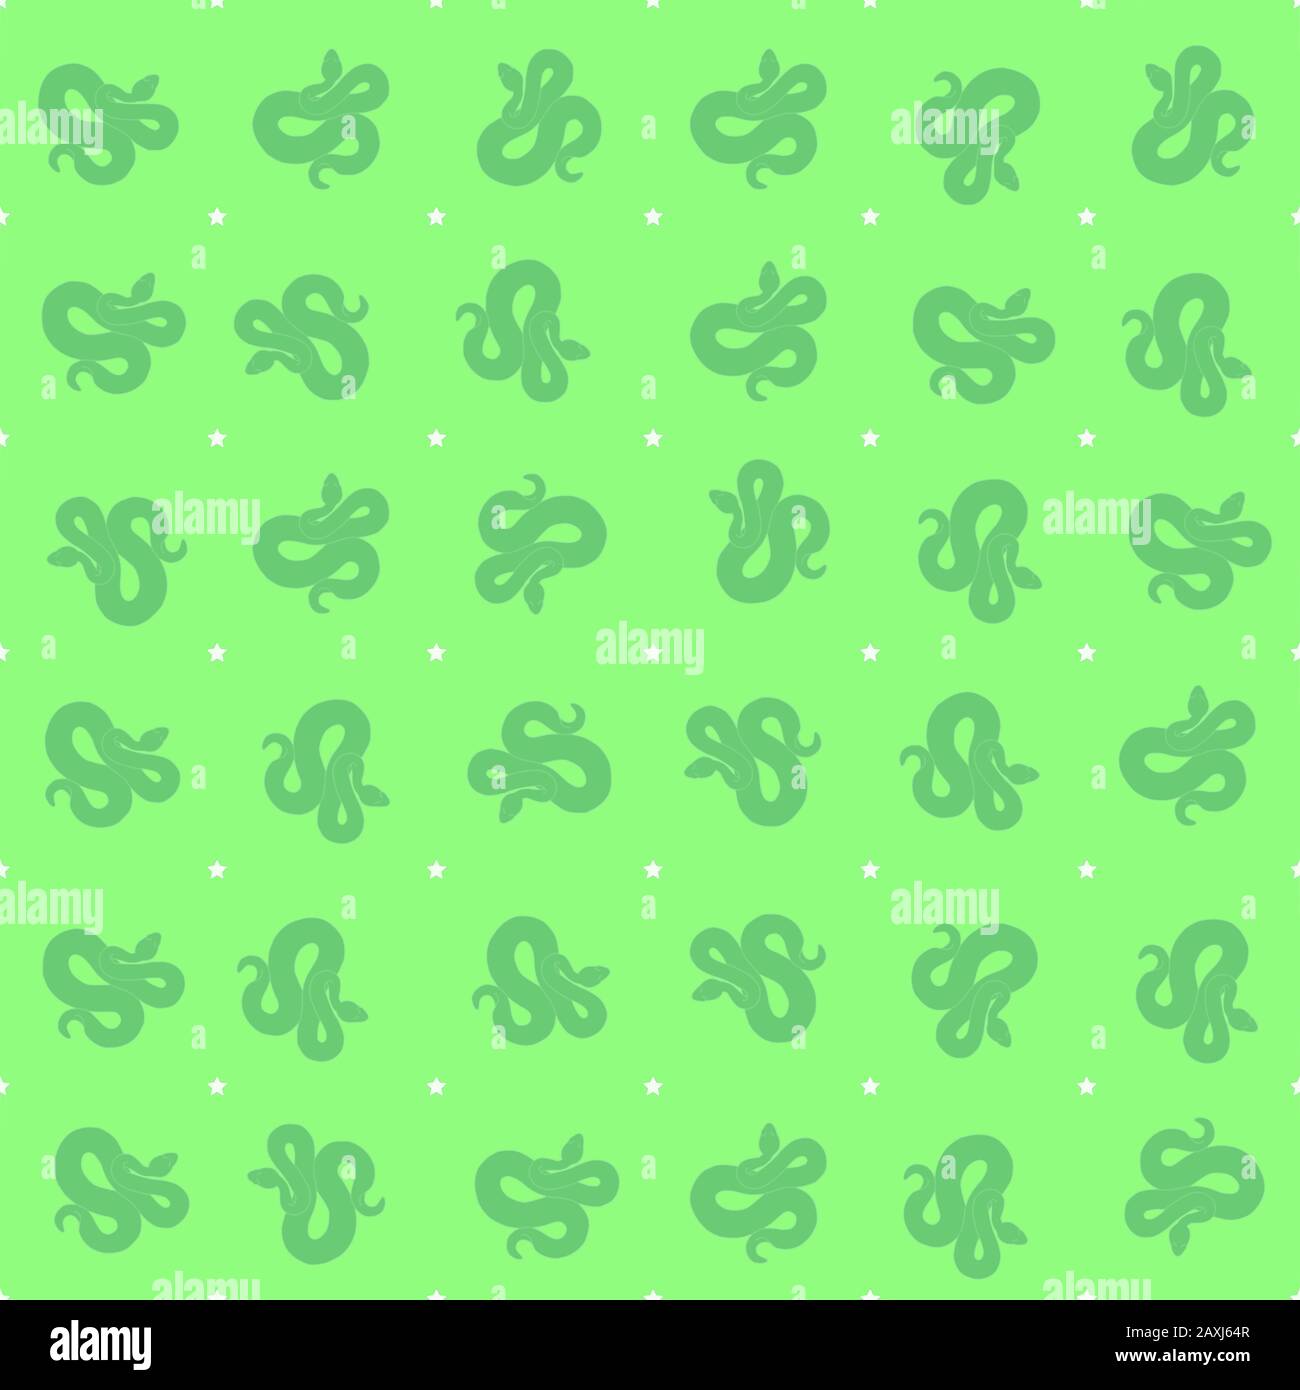 Repeating snake and star pattern. Seamlessly tiles for wallpapers, fabric printing, and embroidery. Green snakes/white stars on a green background. Stock Vector